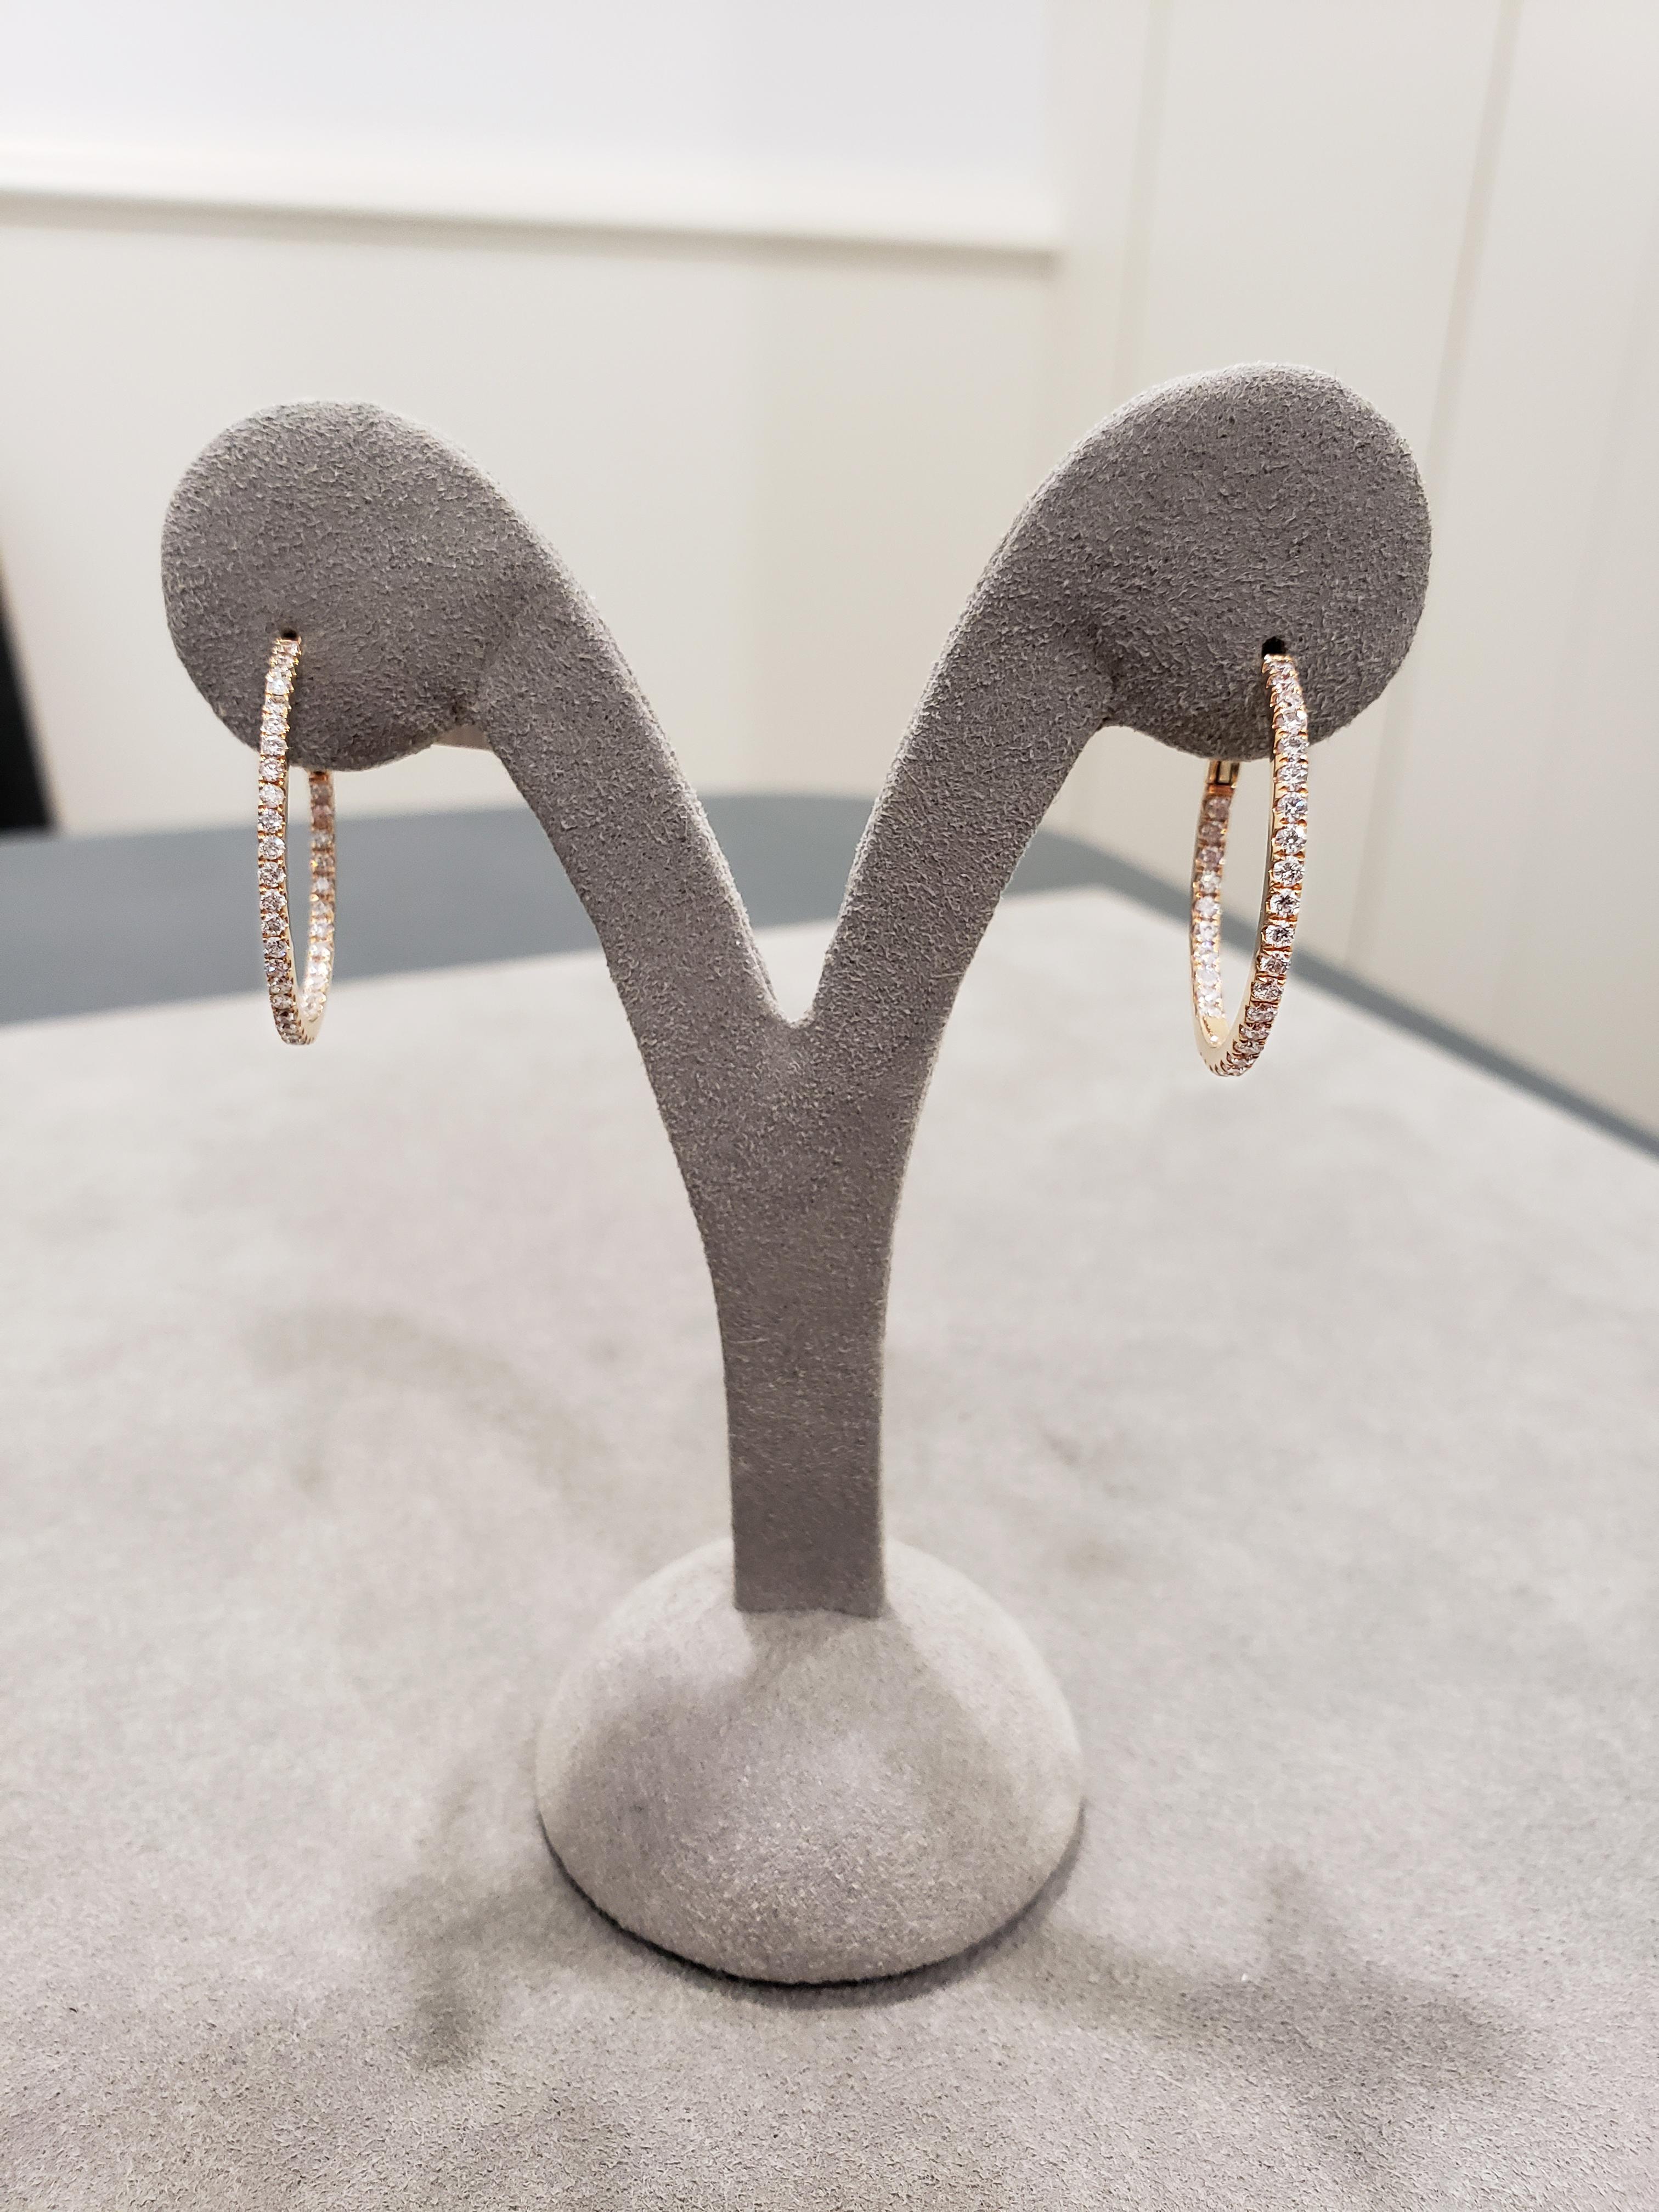 A classic and timeless pair of hoop earrings showcasing a line of sparkling round diamonds weighing 0.84 carats total Made in 18K Rose Gold
Style available in different price ranges. Prices are based on your selection.

Roman Malakov is a custom